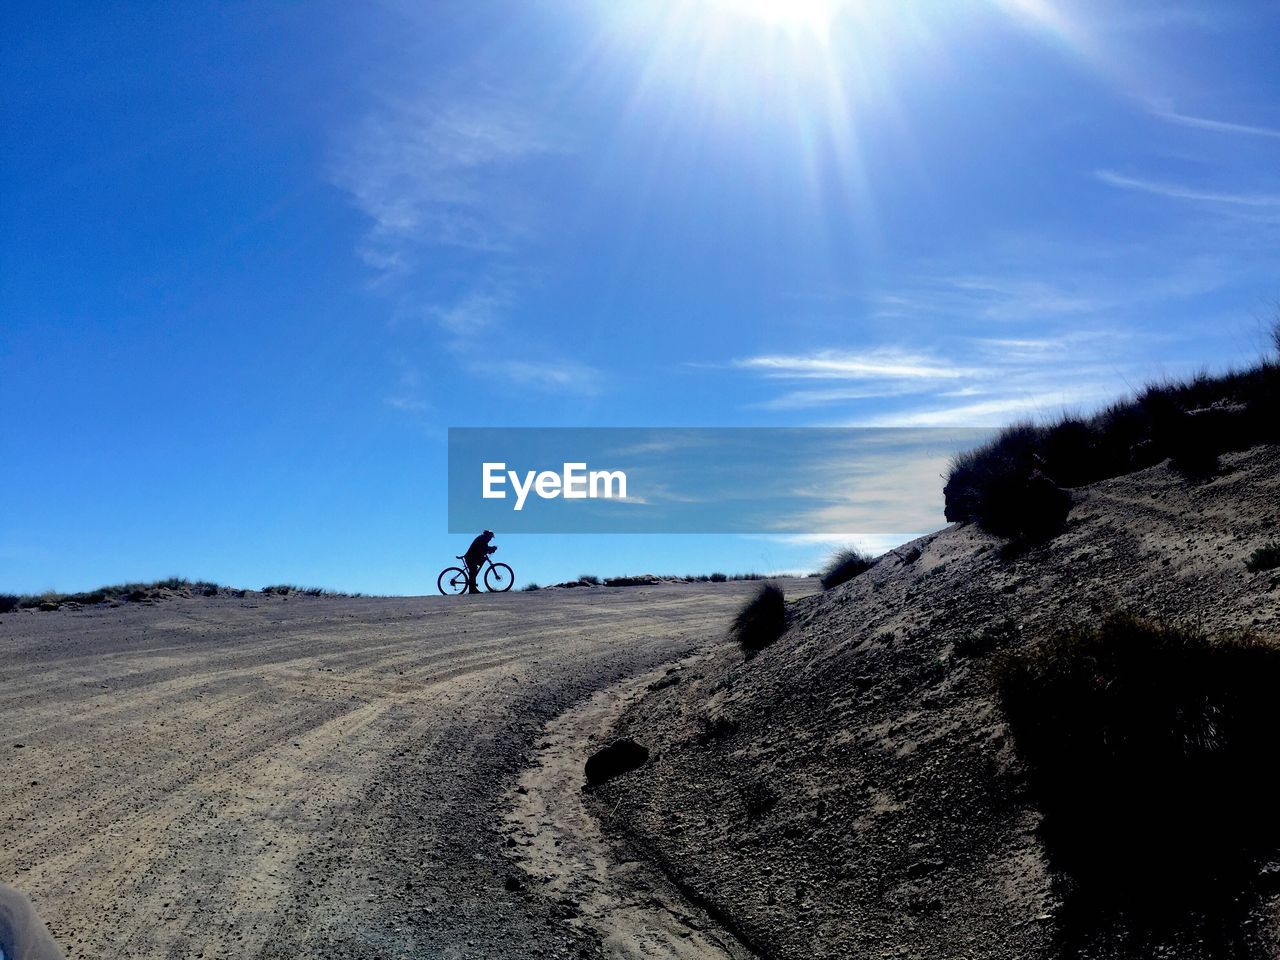 Man riding bicycle on dirt road against blue sky